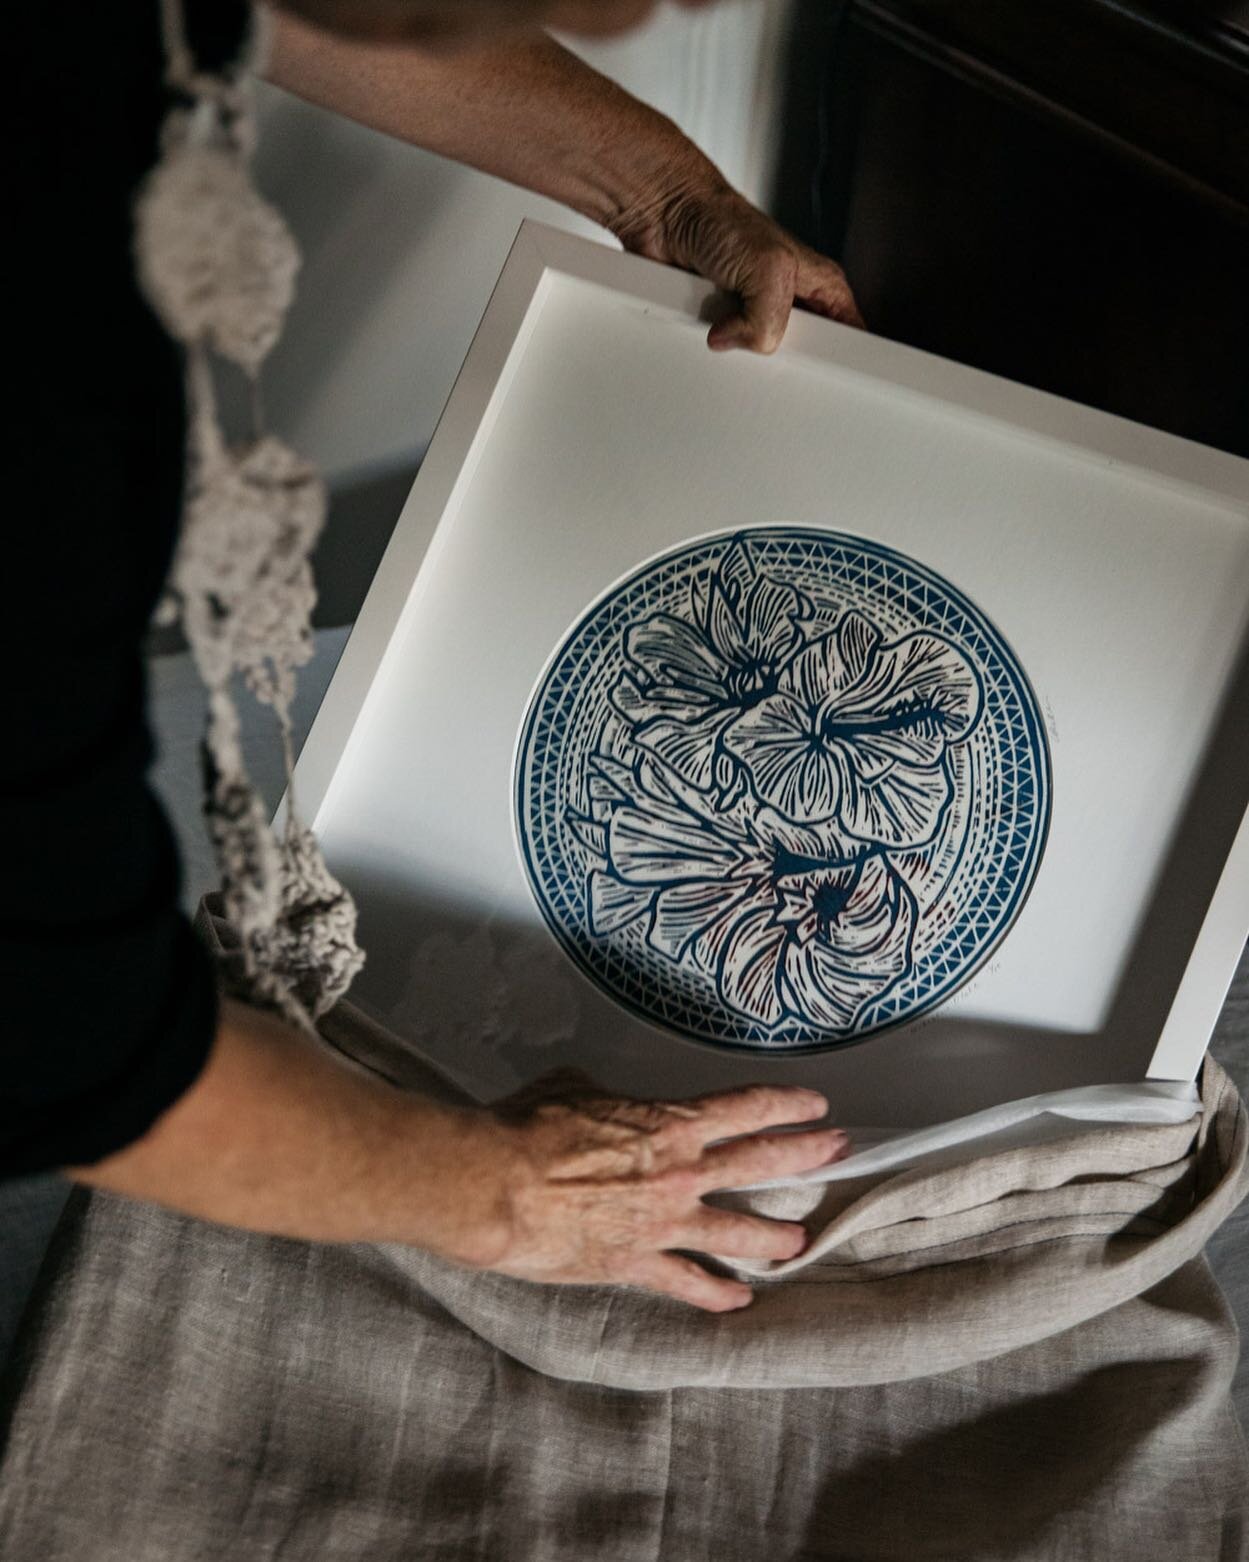 Hibiscus Plate lino cut - one of a series which includes nasturtium plate and daisy plate. The inspiration for the plate series was to capture the view from above a vase of flowers or floating flowers in a large bowl - a flattened blend of shapes and